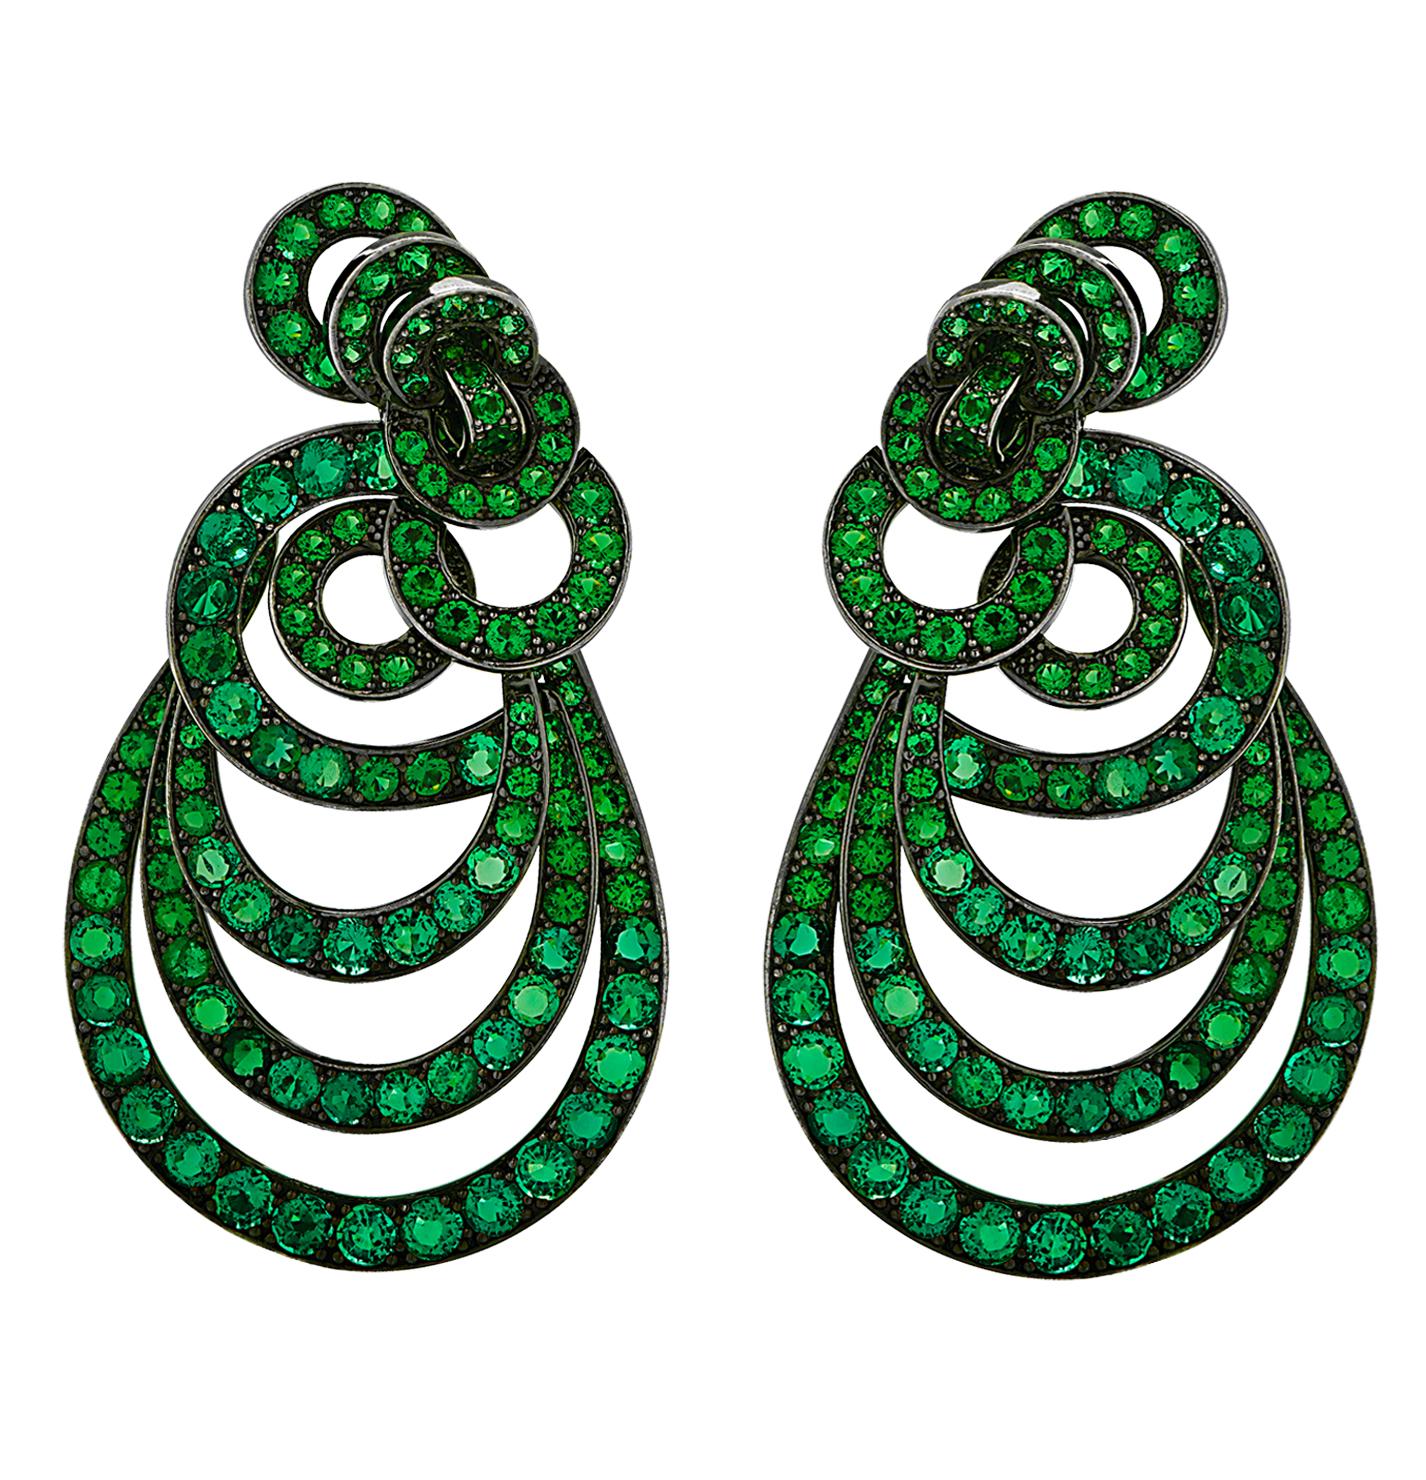 This unique pair of earrings fuse elegance and whimsical design. Set in 18 karat gold plated with black rhodium, showcasing 280 round cut emeralds, weighing approximately 18 carats. Framed with layers of circles cascading into ovals, arranged to